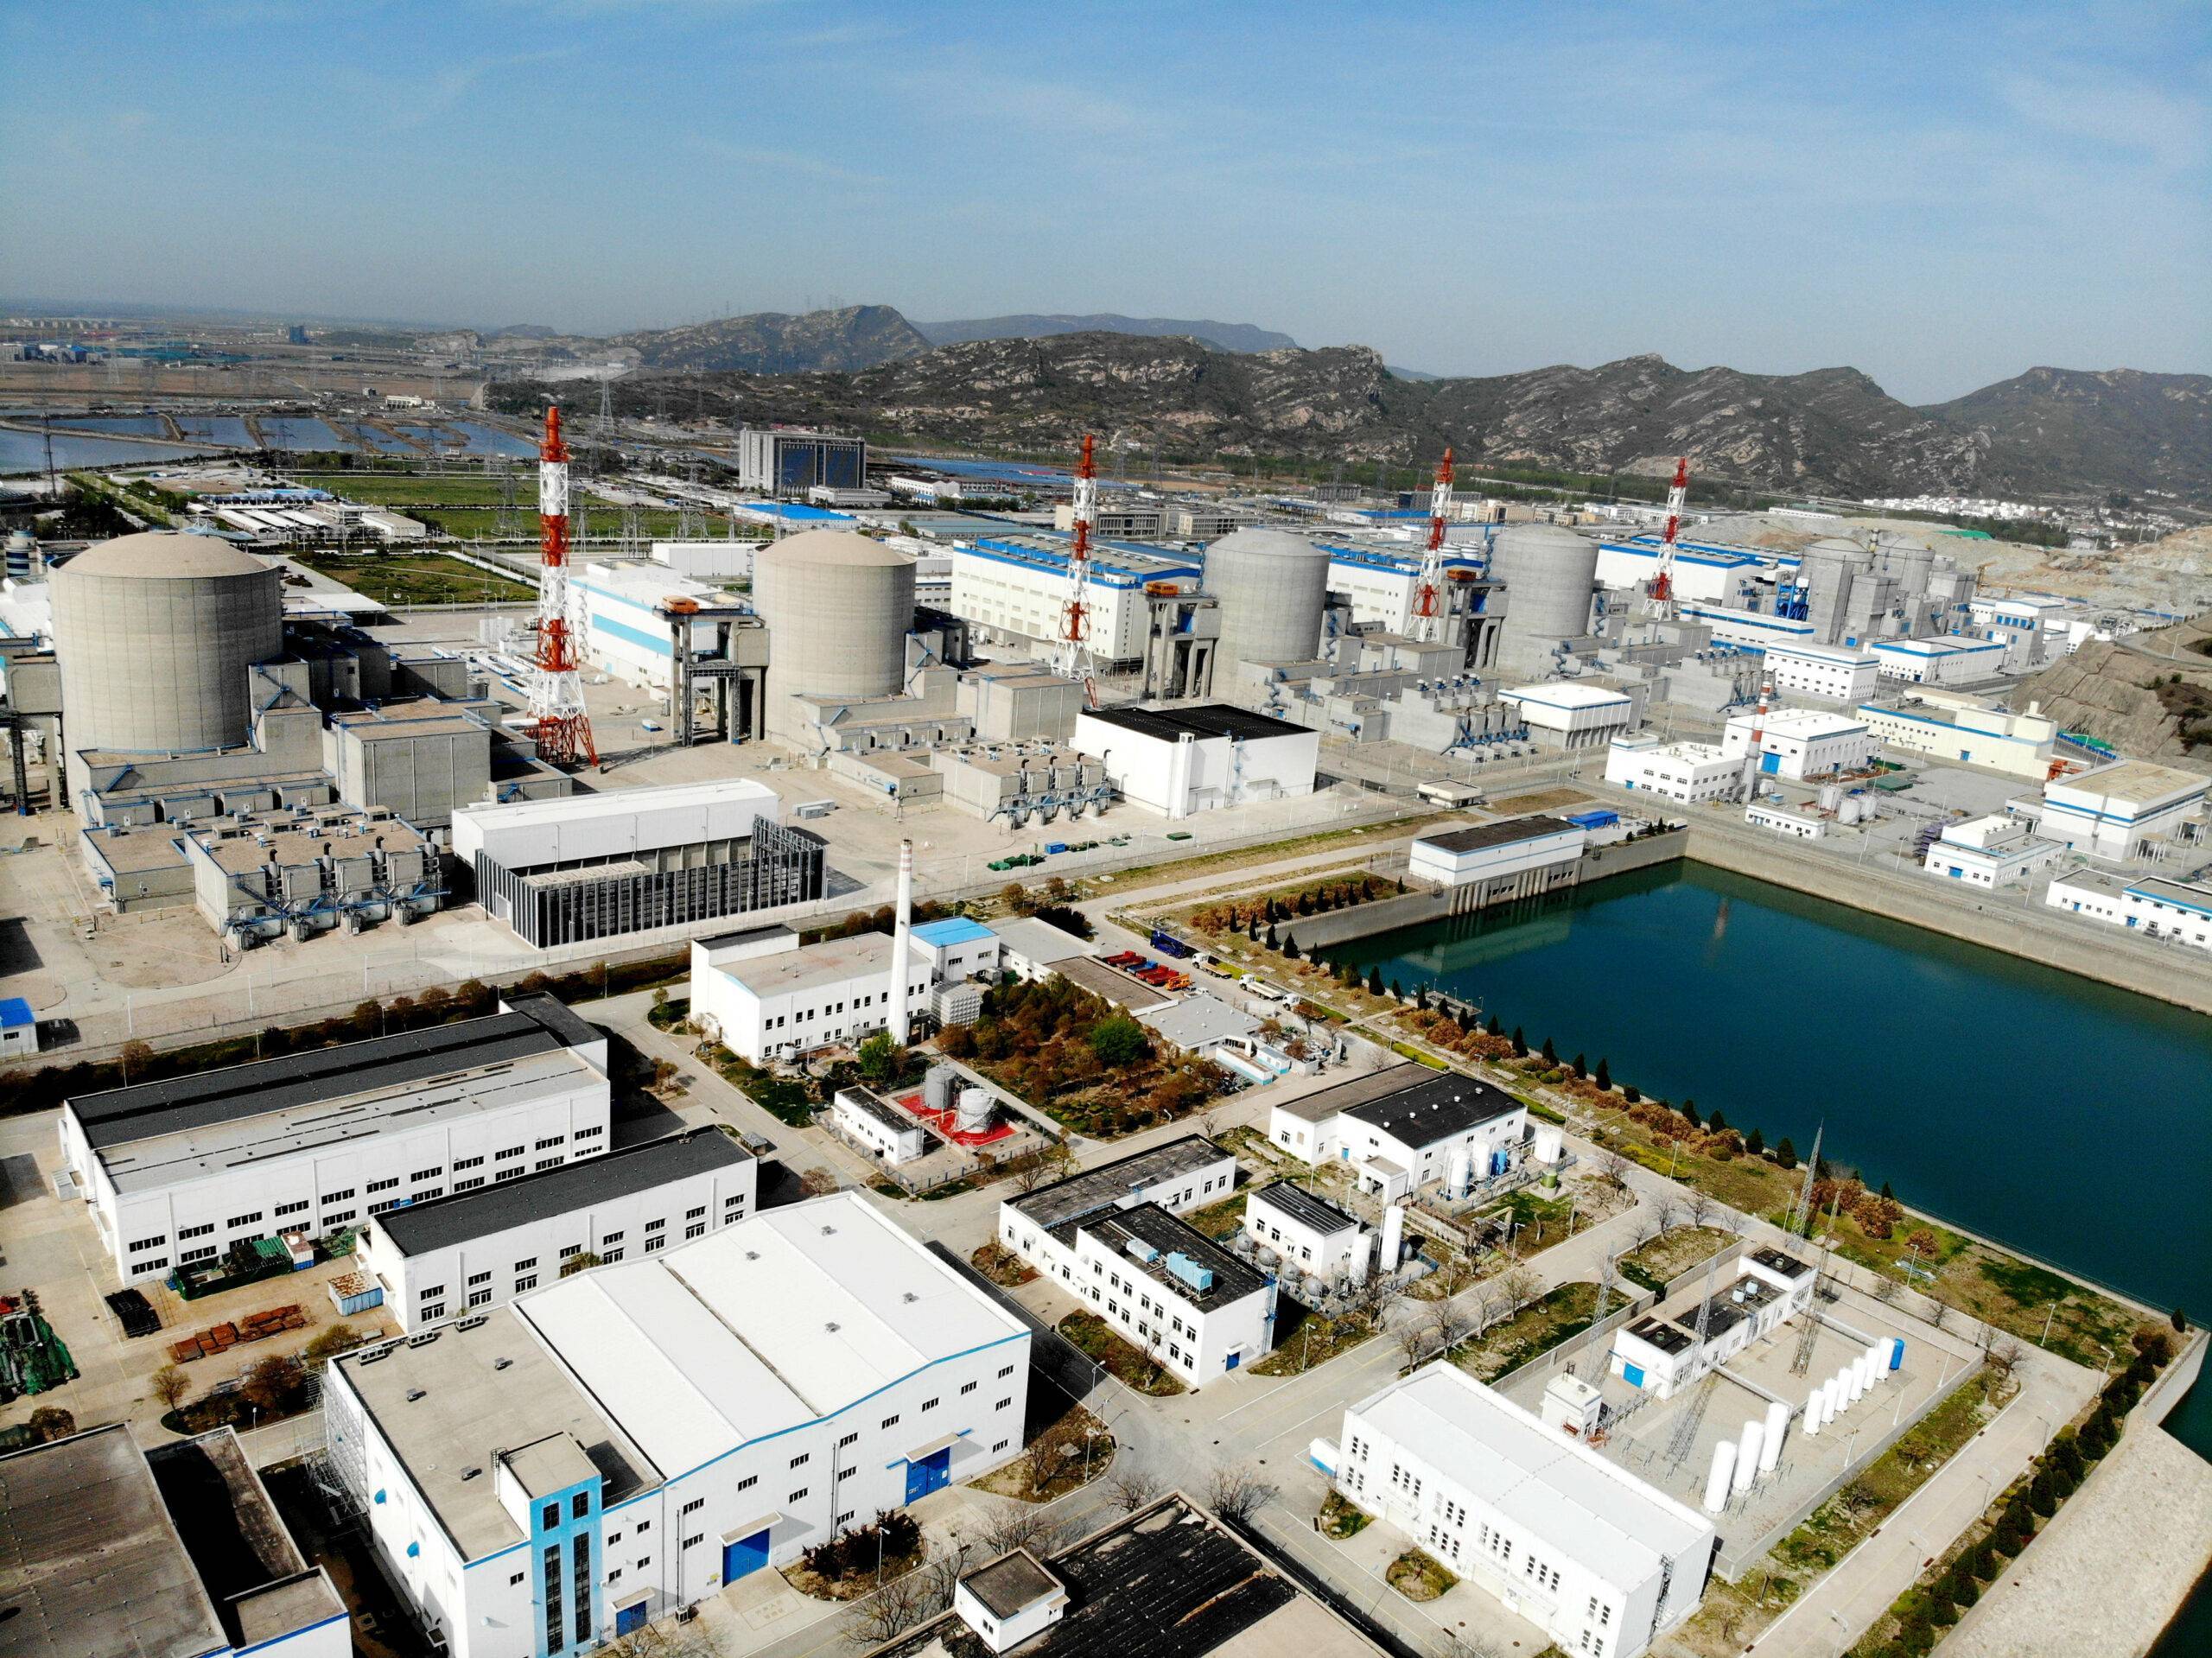 LIANYUNGANG, CHINA - APRIL 18, 2021 - Photo taken on April 18, 2021 shows units 1-6 of the Tianwan Nuclear Power Plant of China National Nuclear Corporation in Lianyungang City, East China's Jiangsu Province. The No. 6 unit of CNNC Tianwan Nuclear Power Plant has received the operation license issued by the National Nuclear Safety Administration, and the fuel for the first furnace of Unit 6 has started loading, which is the first nuclear power unit to be loaded in China during the 14th Five-Year Plan period. With the successful entry of the first fuel assembly into the reactor, it marked the entry of the reactor into the nuclear commissioning phase of the main system and a key step towards the complete completion of the third phase project of Tianwan Nuclear Power Plant. (Photo by Wang Chun / Costfoto/Sipa USA)/33015832//2104181047